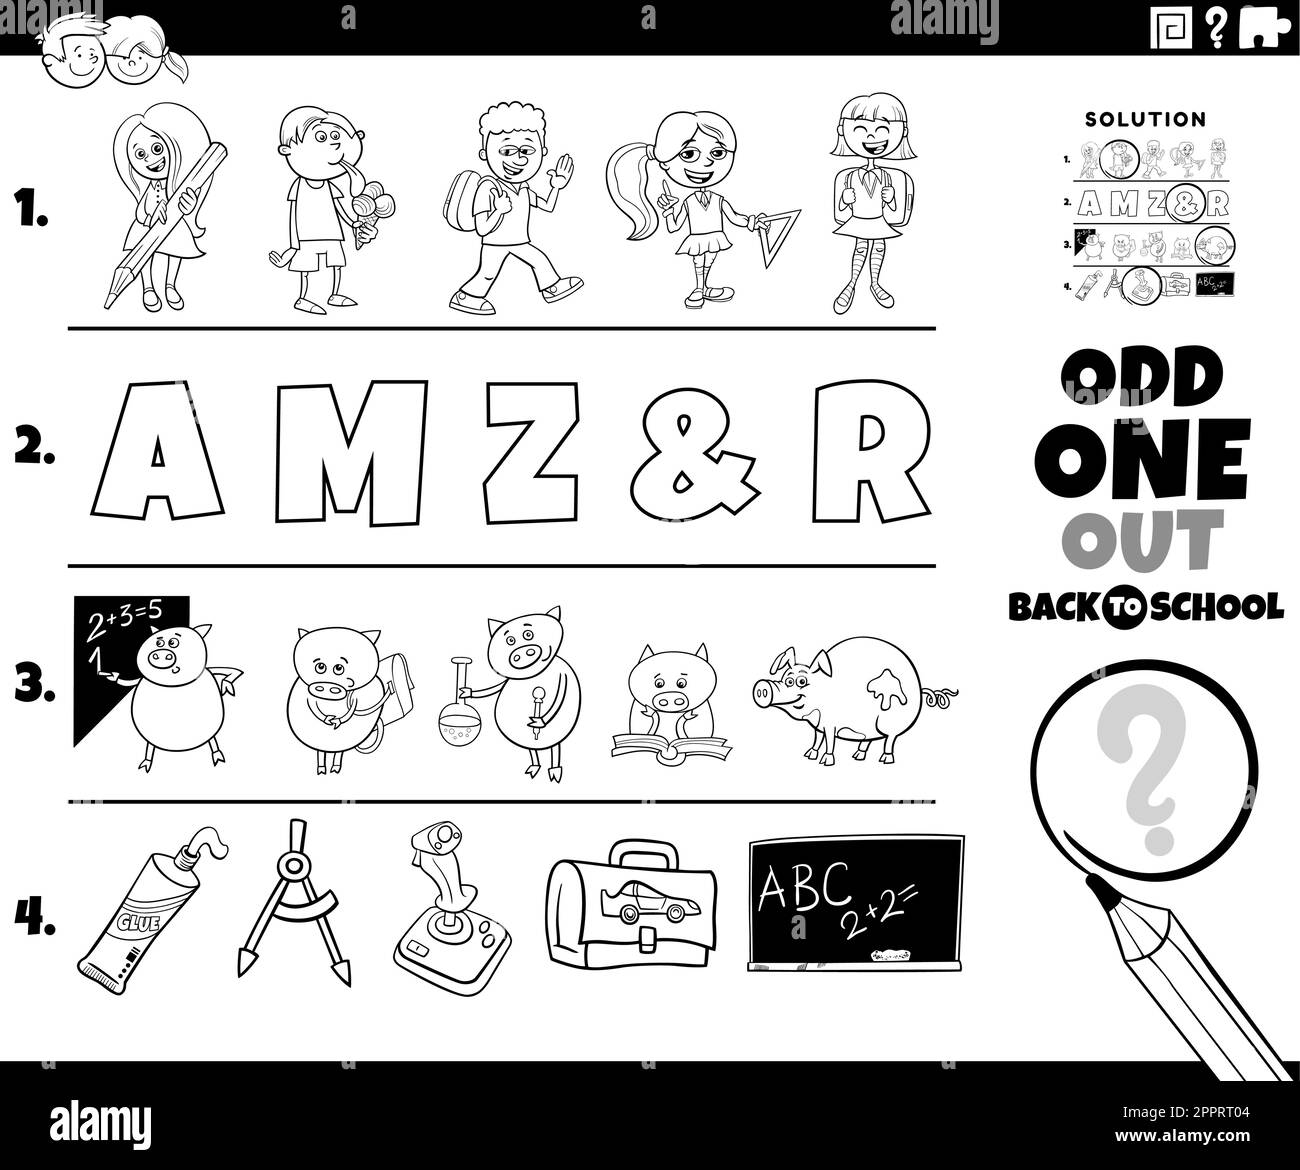 odd one out task with cartoon characters coloring page Stock Vector